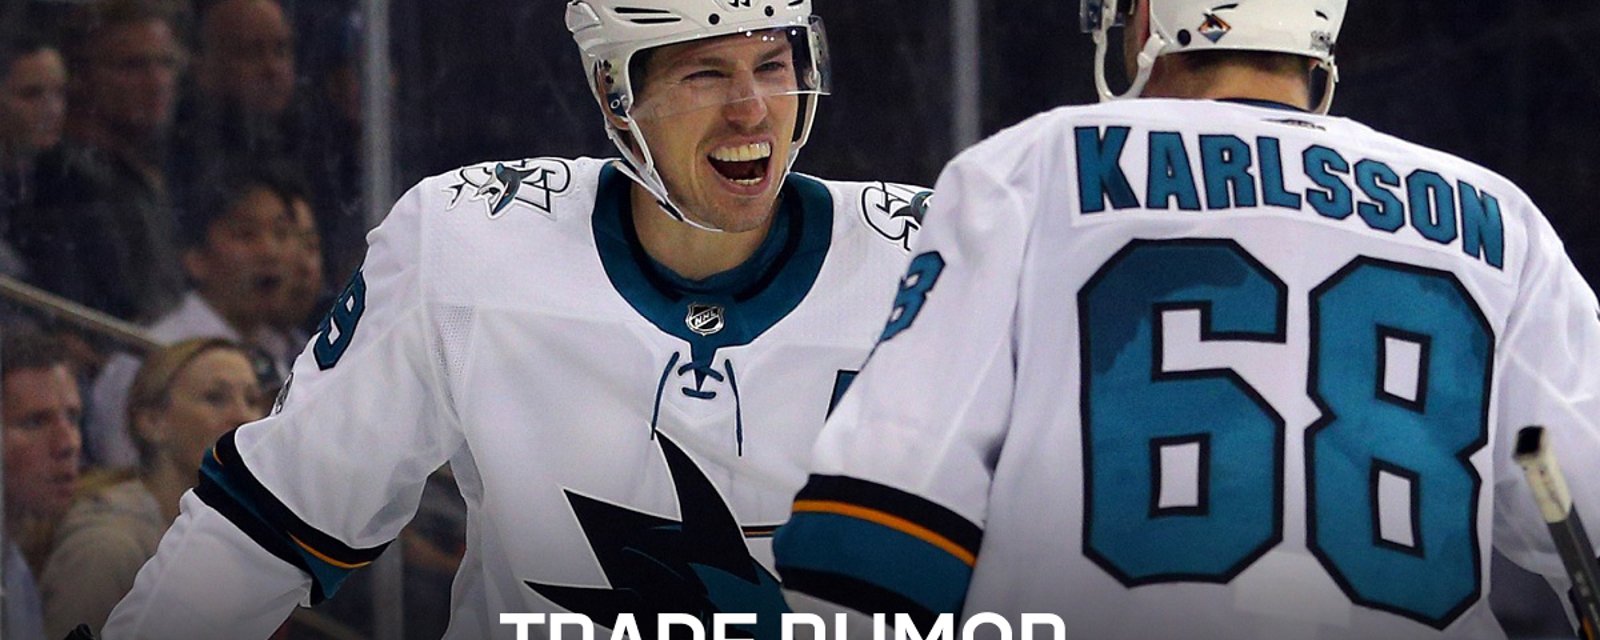 Rumor: Sharks defenseman on the trading block as the team looks to replace Marleau.